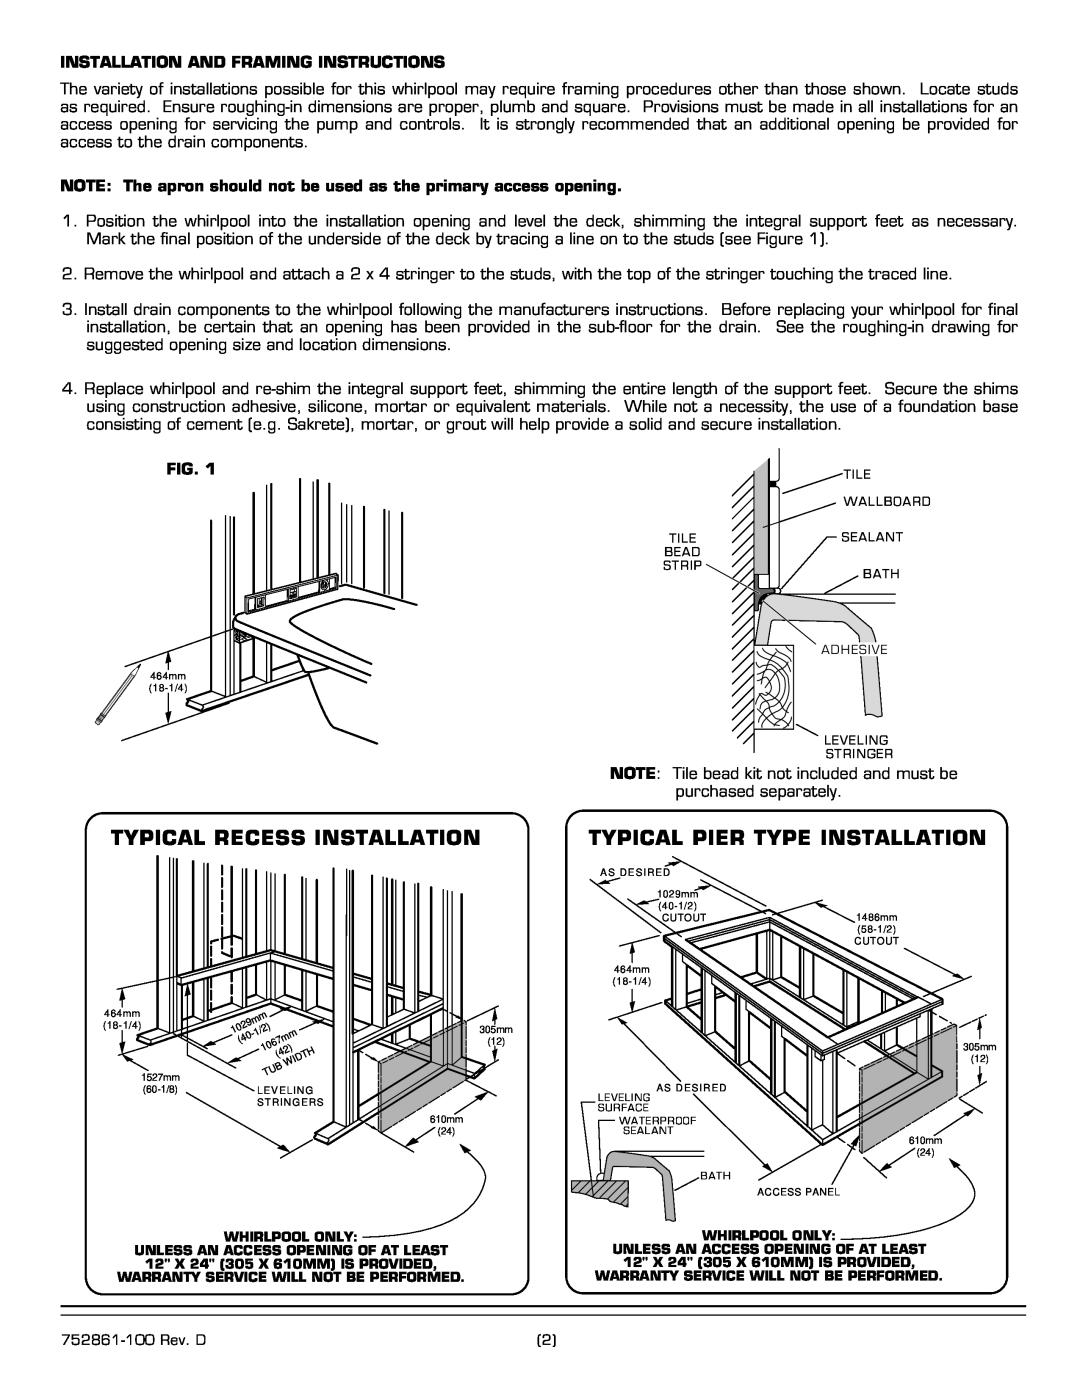 American Standard 2772E SERIES installation instructions Typical Recess Installation, Typical Pier Type Installation 